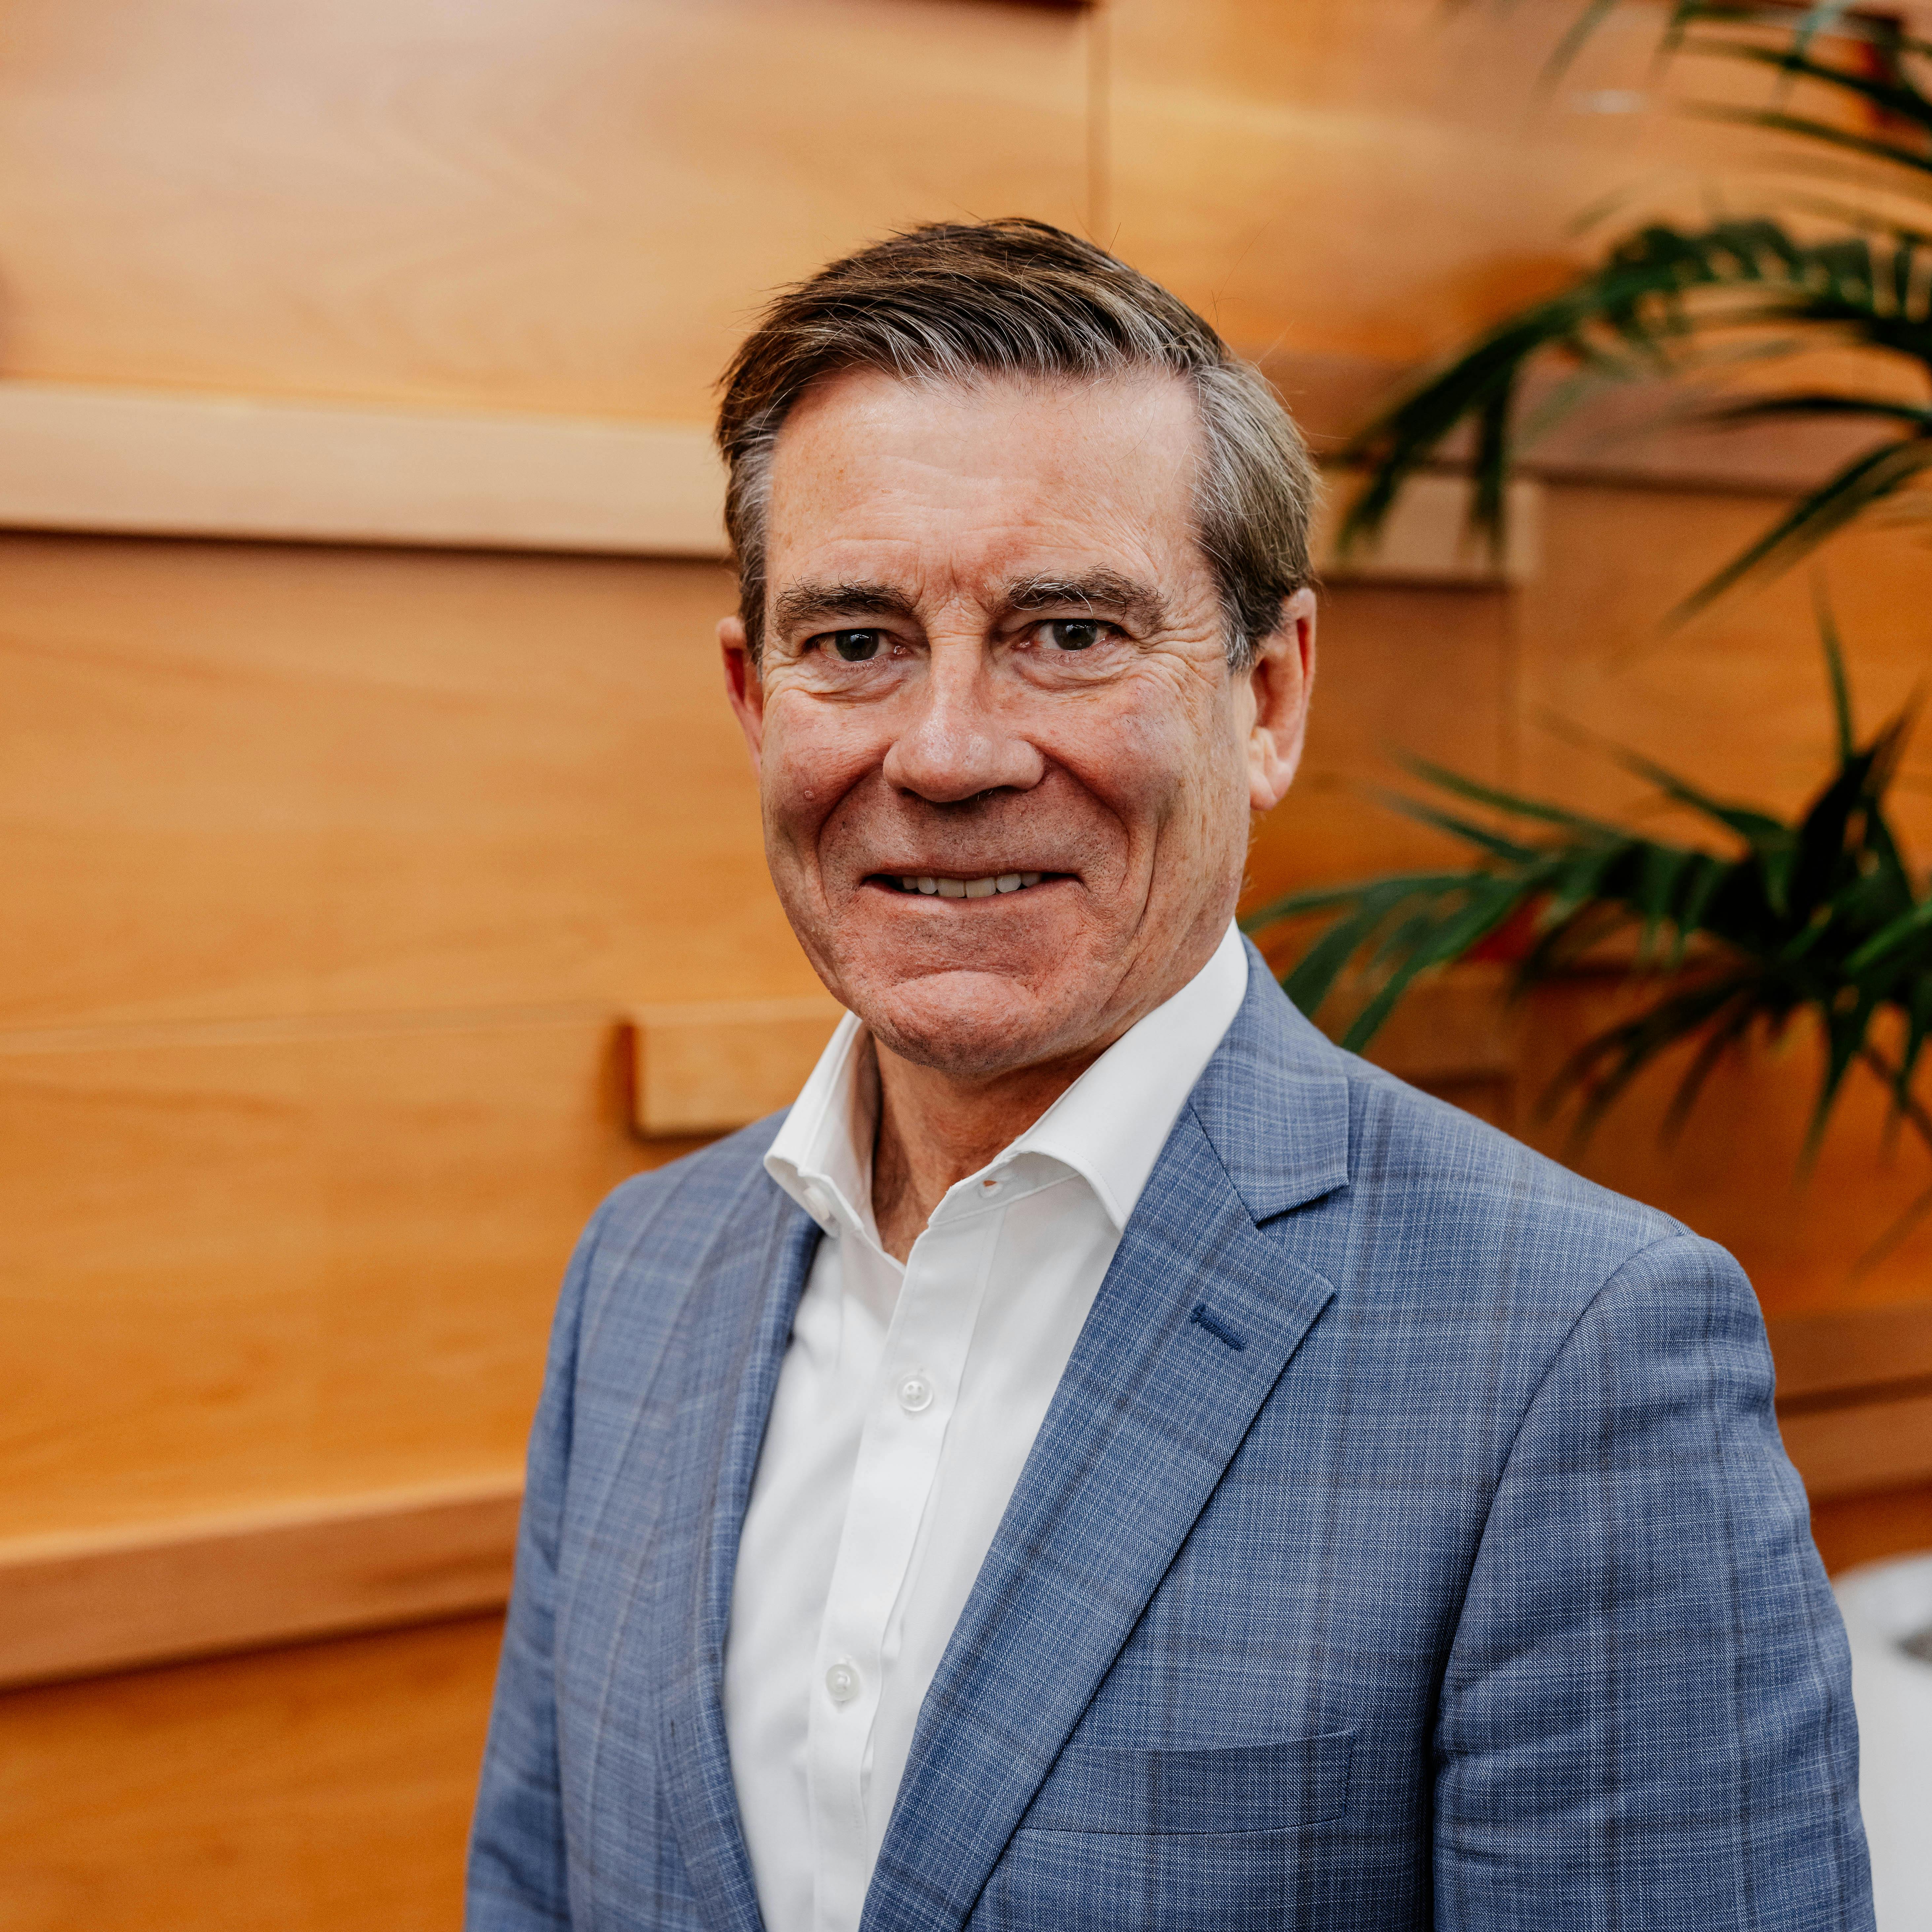 Michael Woodhouse – Chief Executive Officer